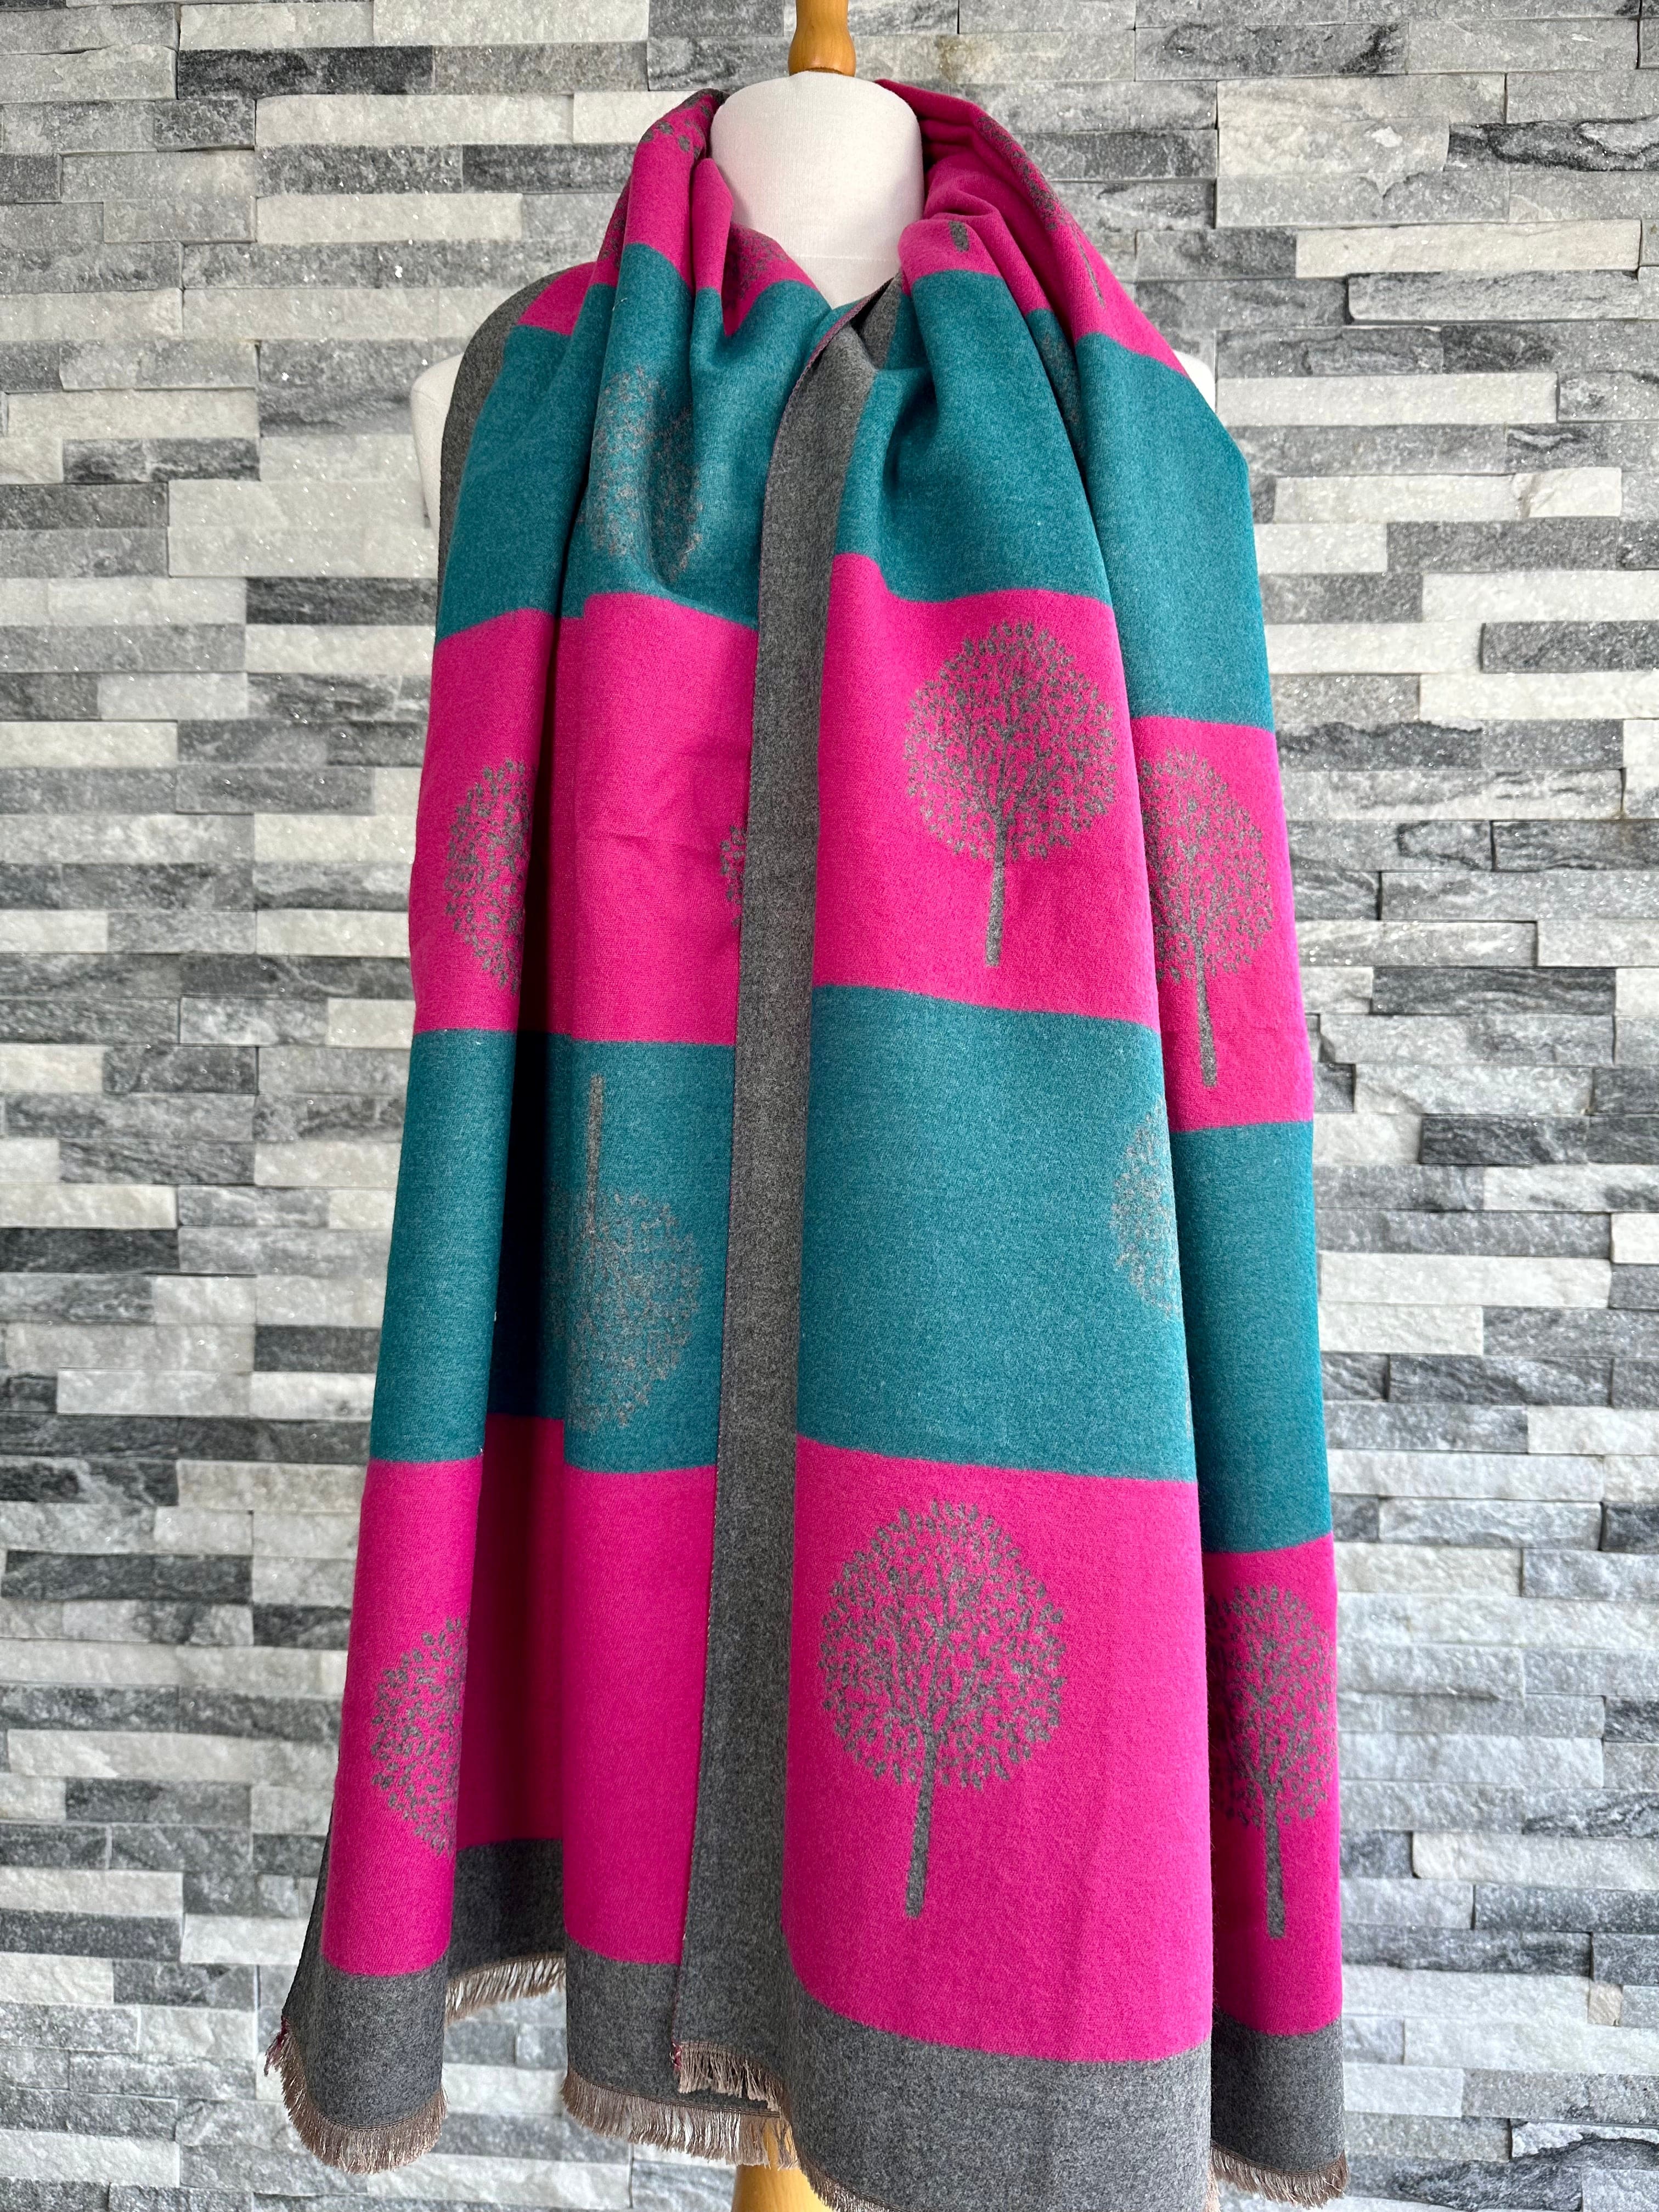 lusciousscarves Scarves & Shawls Teal, Hot Pink and Grey Reversible Mulberry Tree Scarf Wrap.